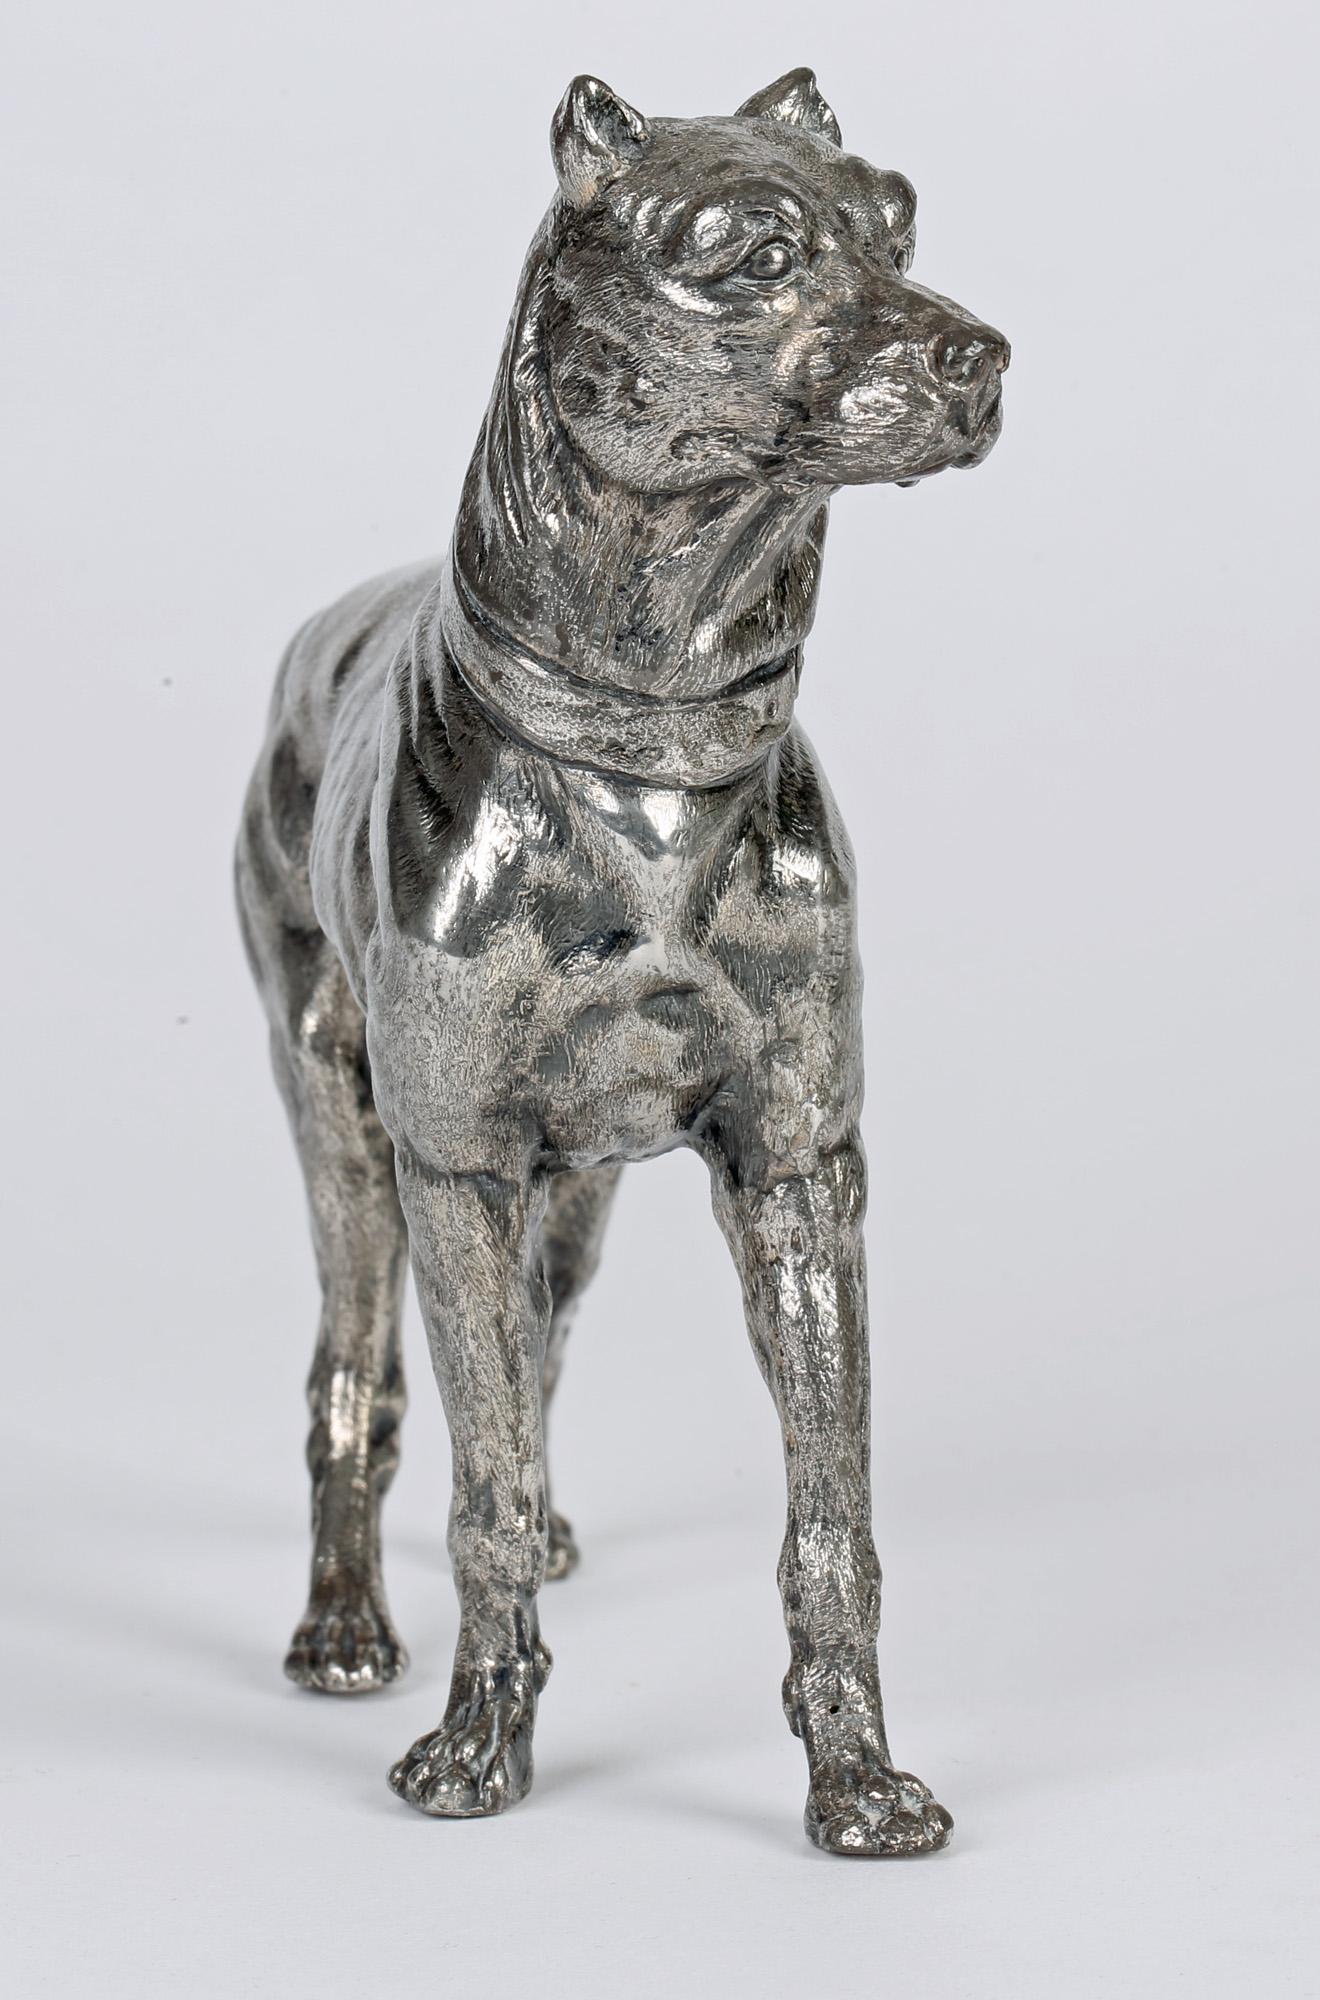 A scarce German Württembergische Metallwarenfabrik WMF Jugendstil silver plated model of a large standing hound by Fritz Diller and dating from circa 1906. The figure is sculpted standing with wonderful definition of its features with great detail